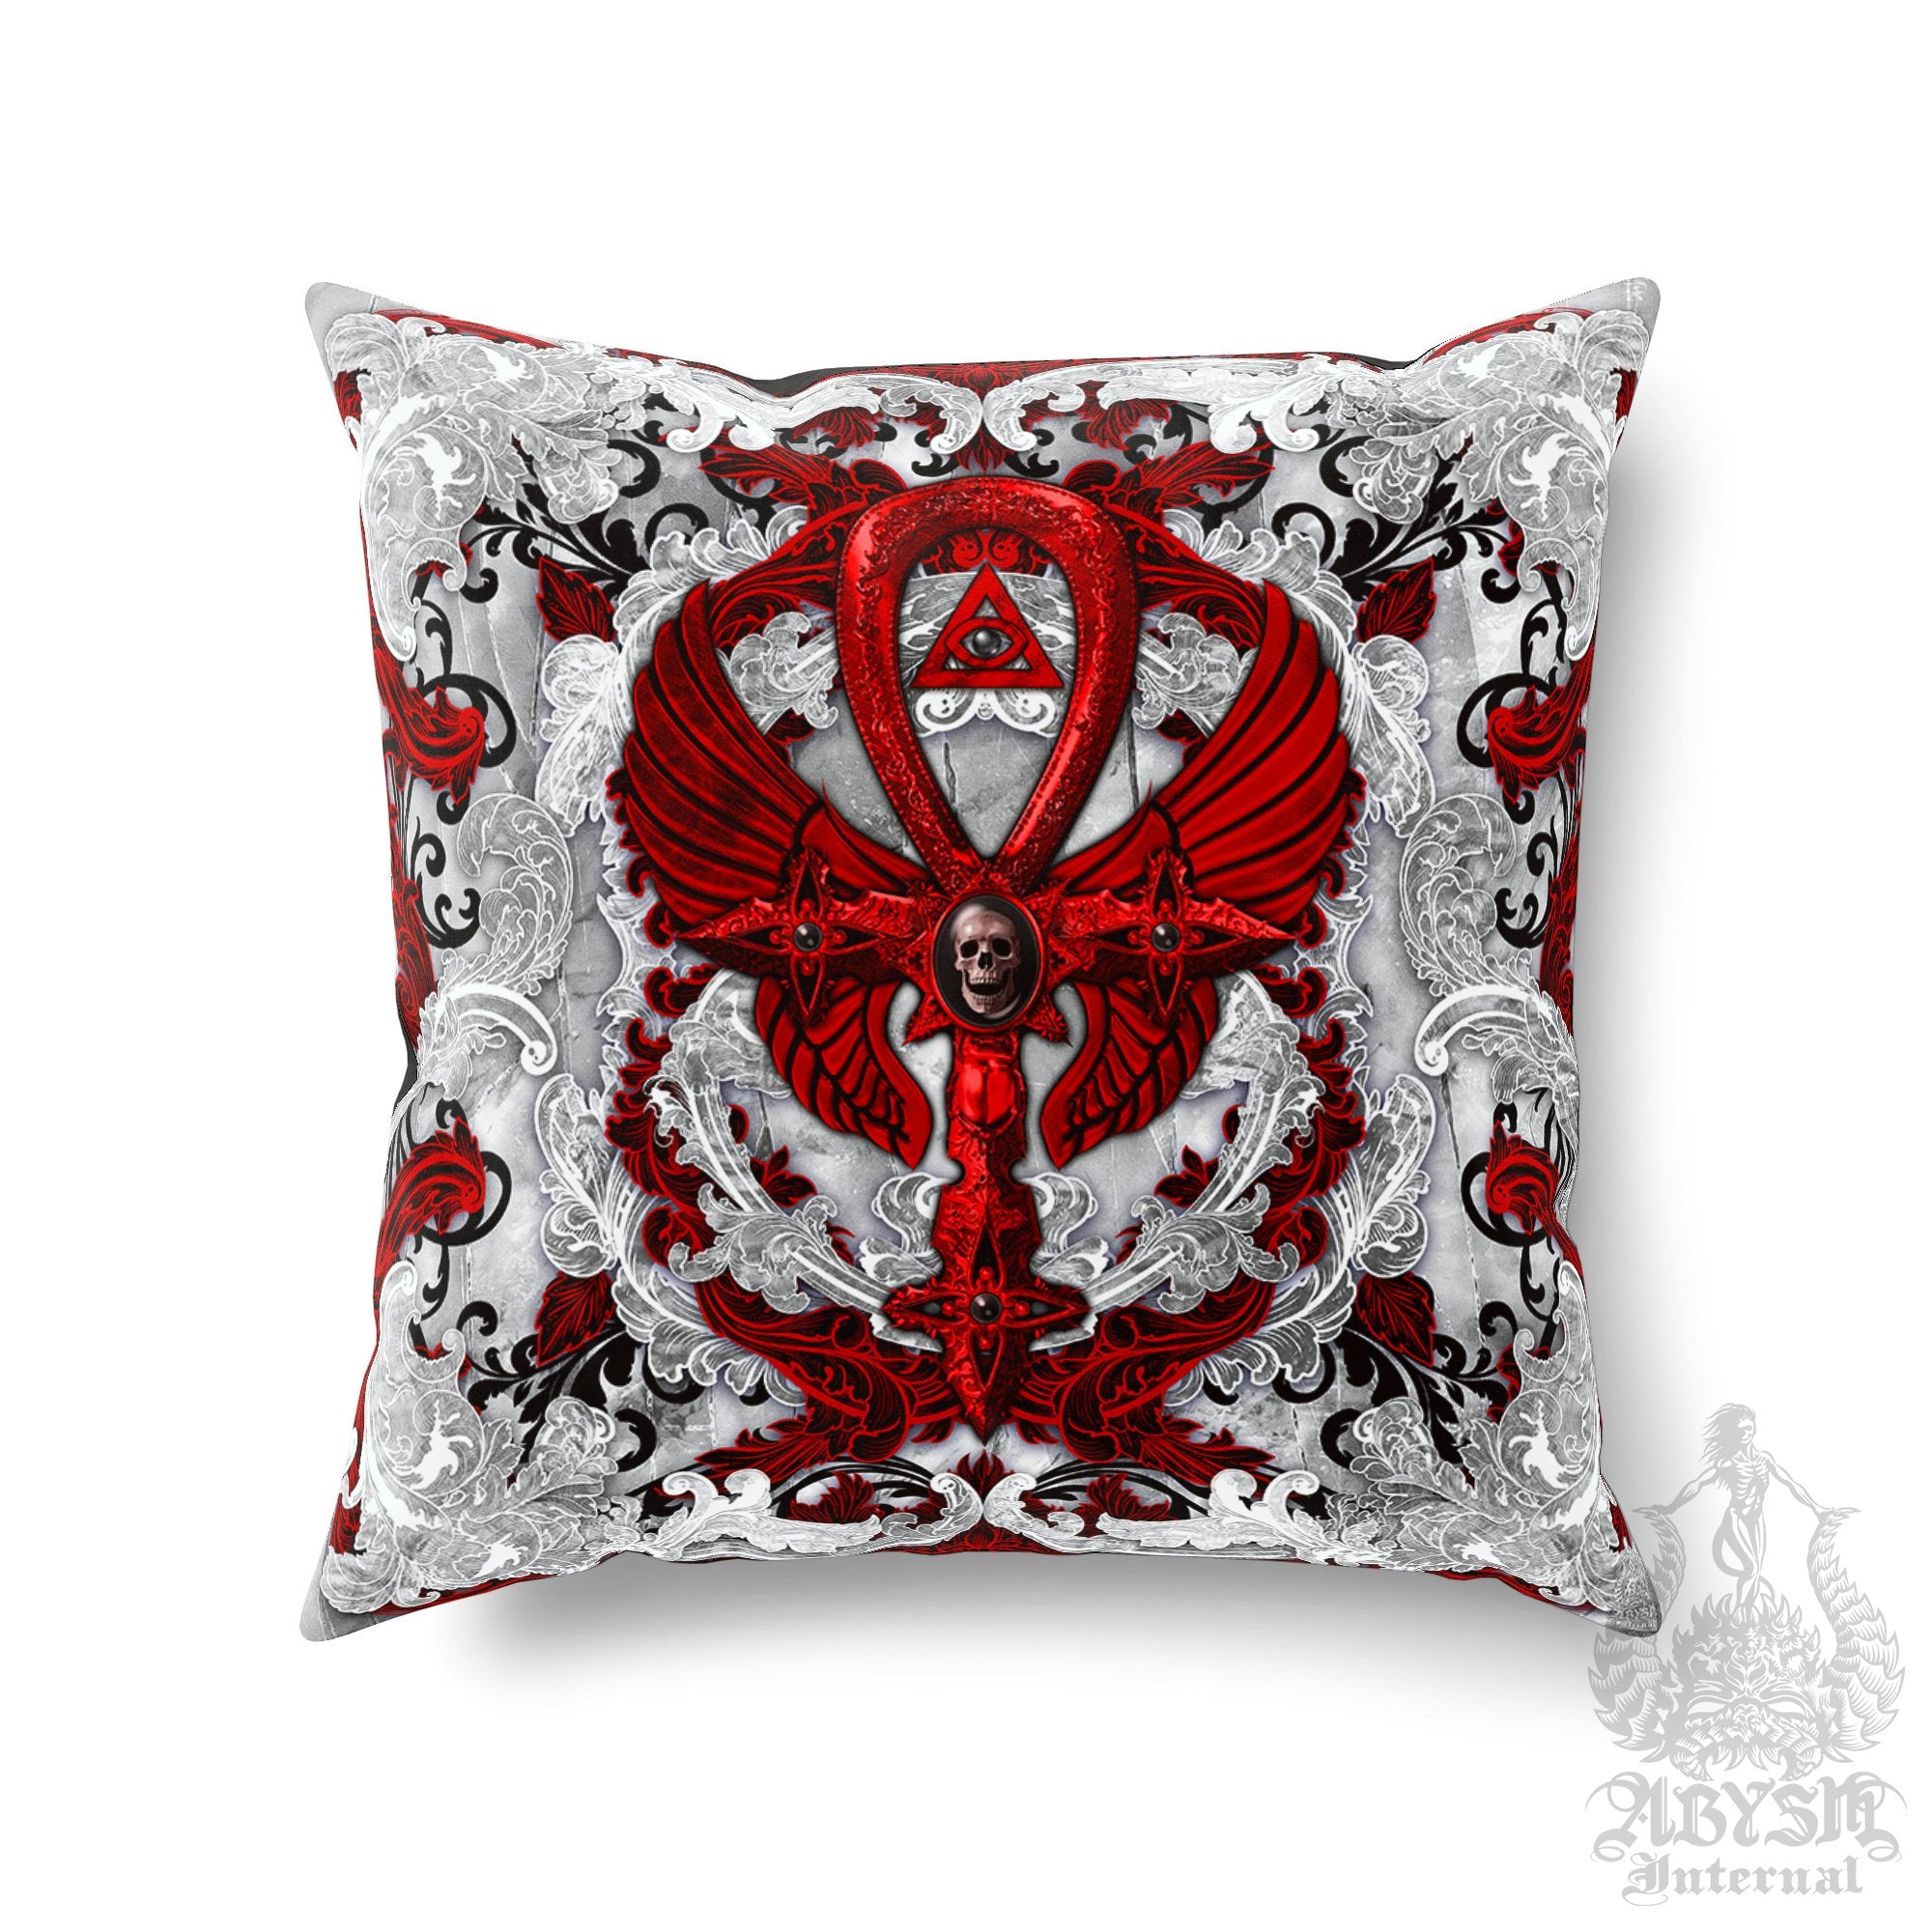 Bloody White Goth Throw Pillow, Decorative Accent Pillow, Square Cushion Cover, Gothic Room Decor, Alternative Home - Ankh Cross Art, Black, Red, 3 Colors - Abysm Internal